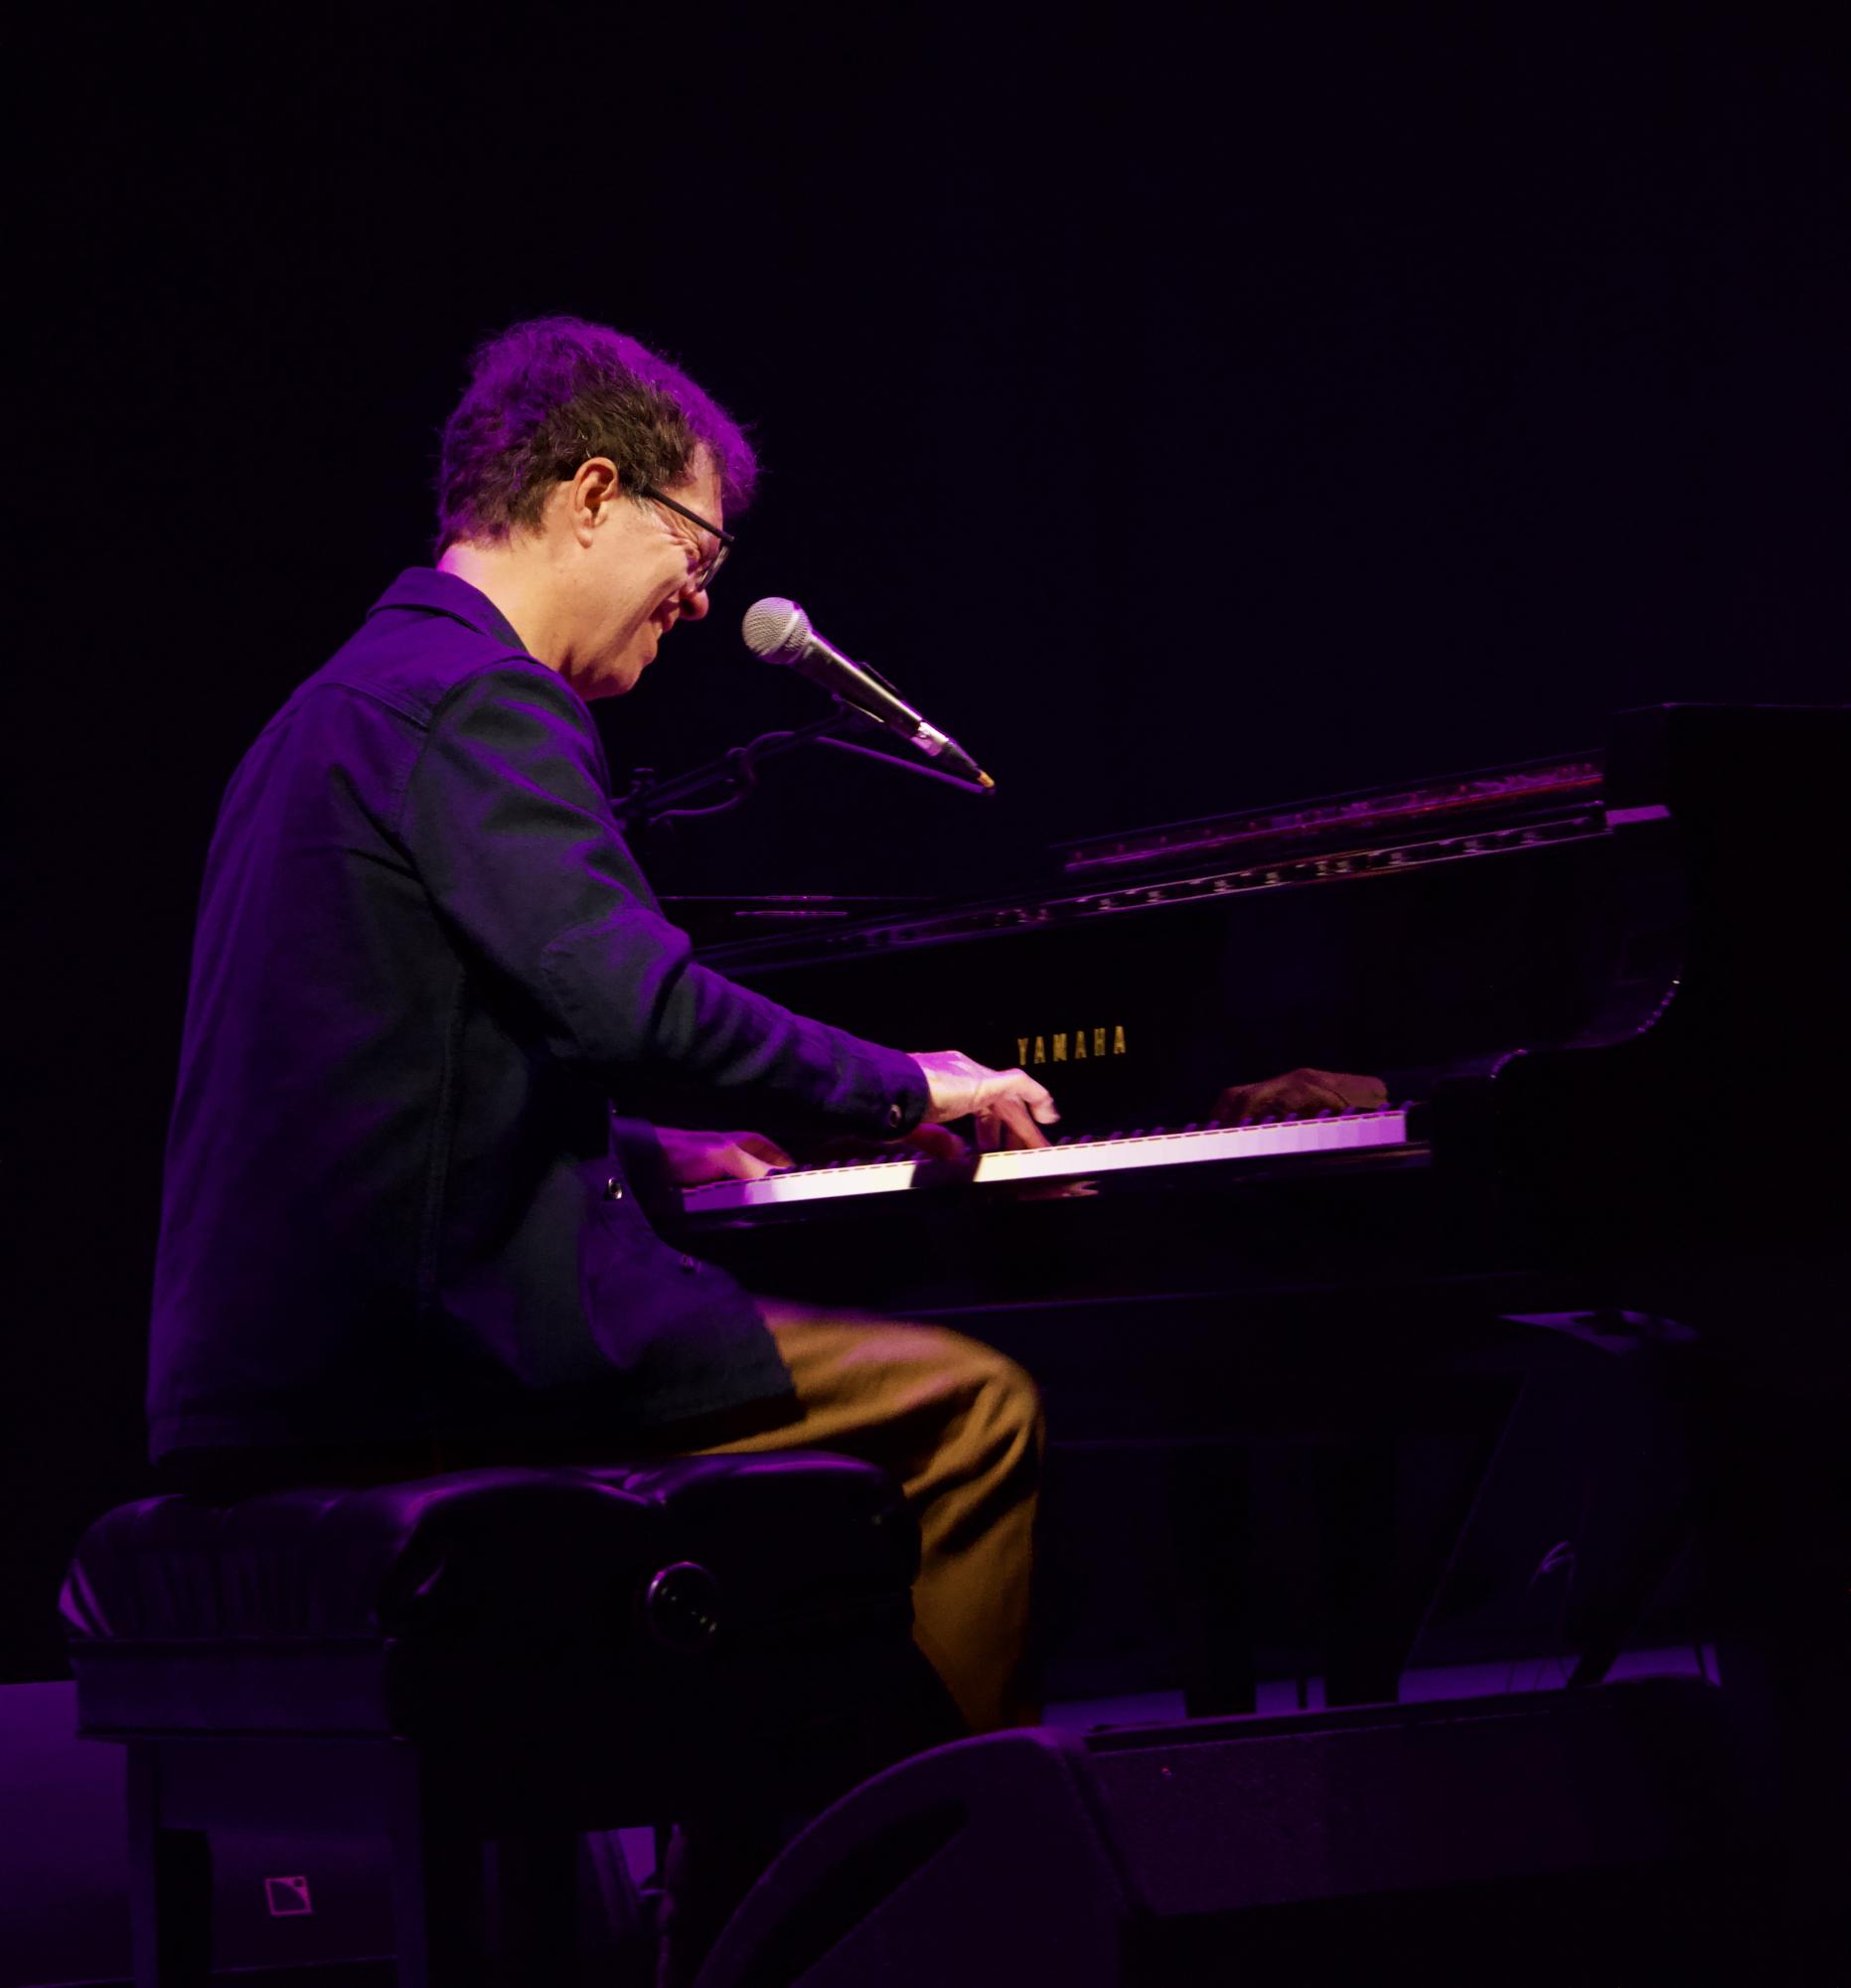 Ben+Folds+and+a+Piano+at+College+Street+Music+Hall